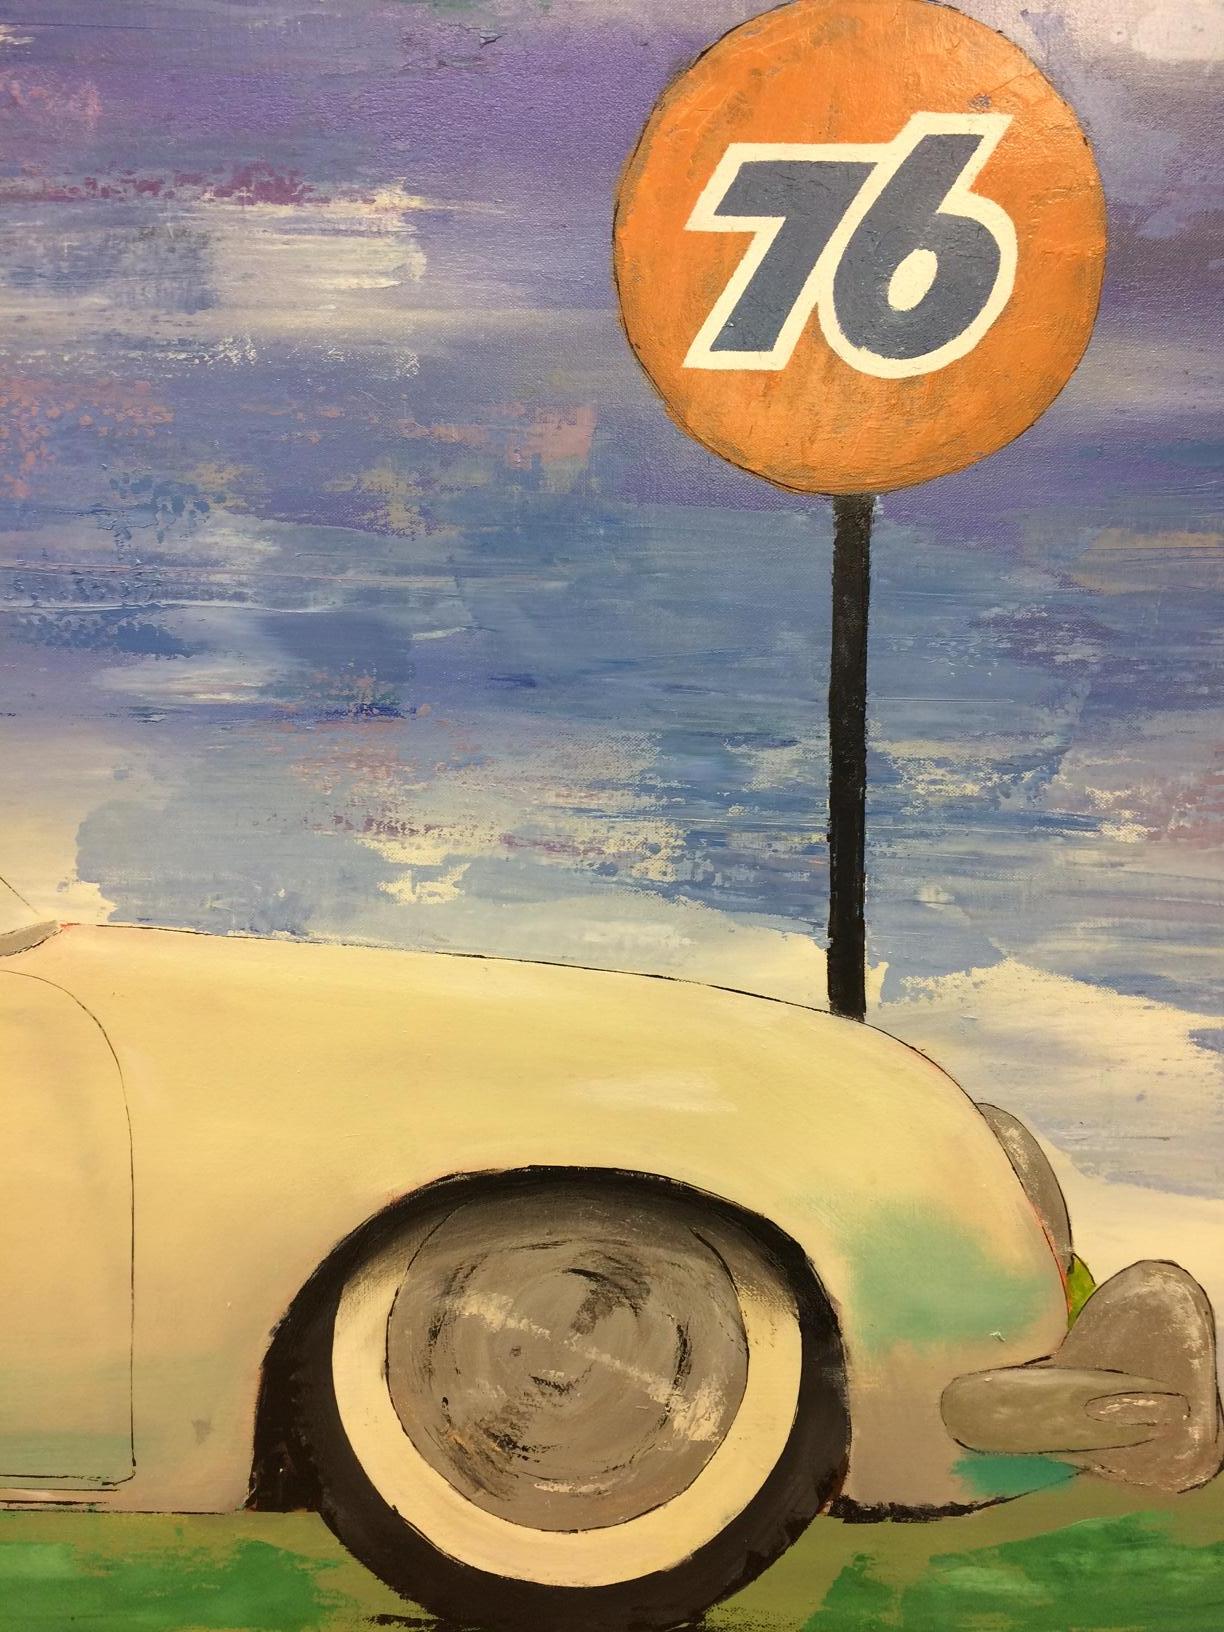 356 at 76 original 36x36 pop art contemporary landscape oil painting - Painting by Jim Twerell